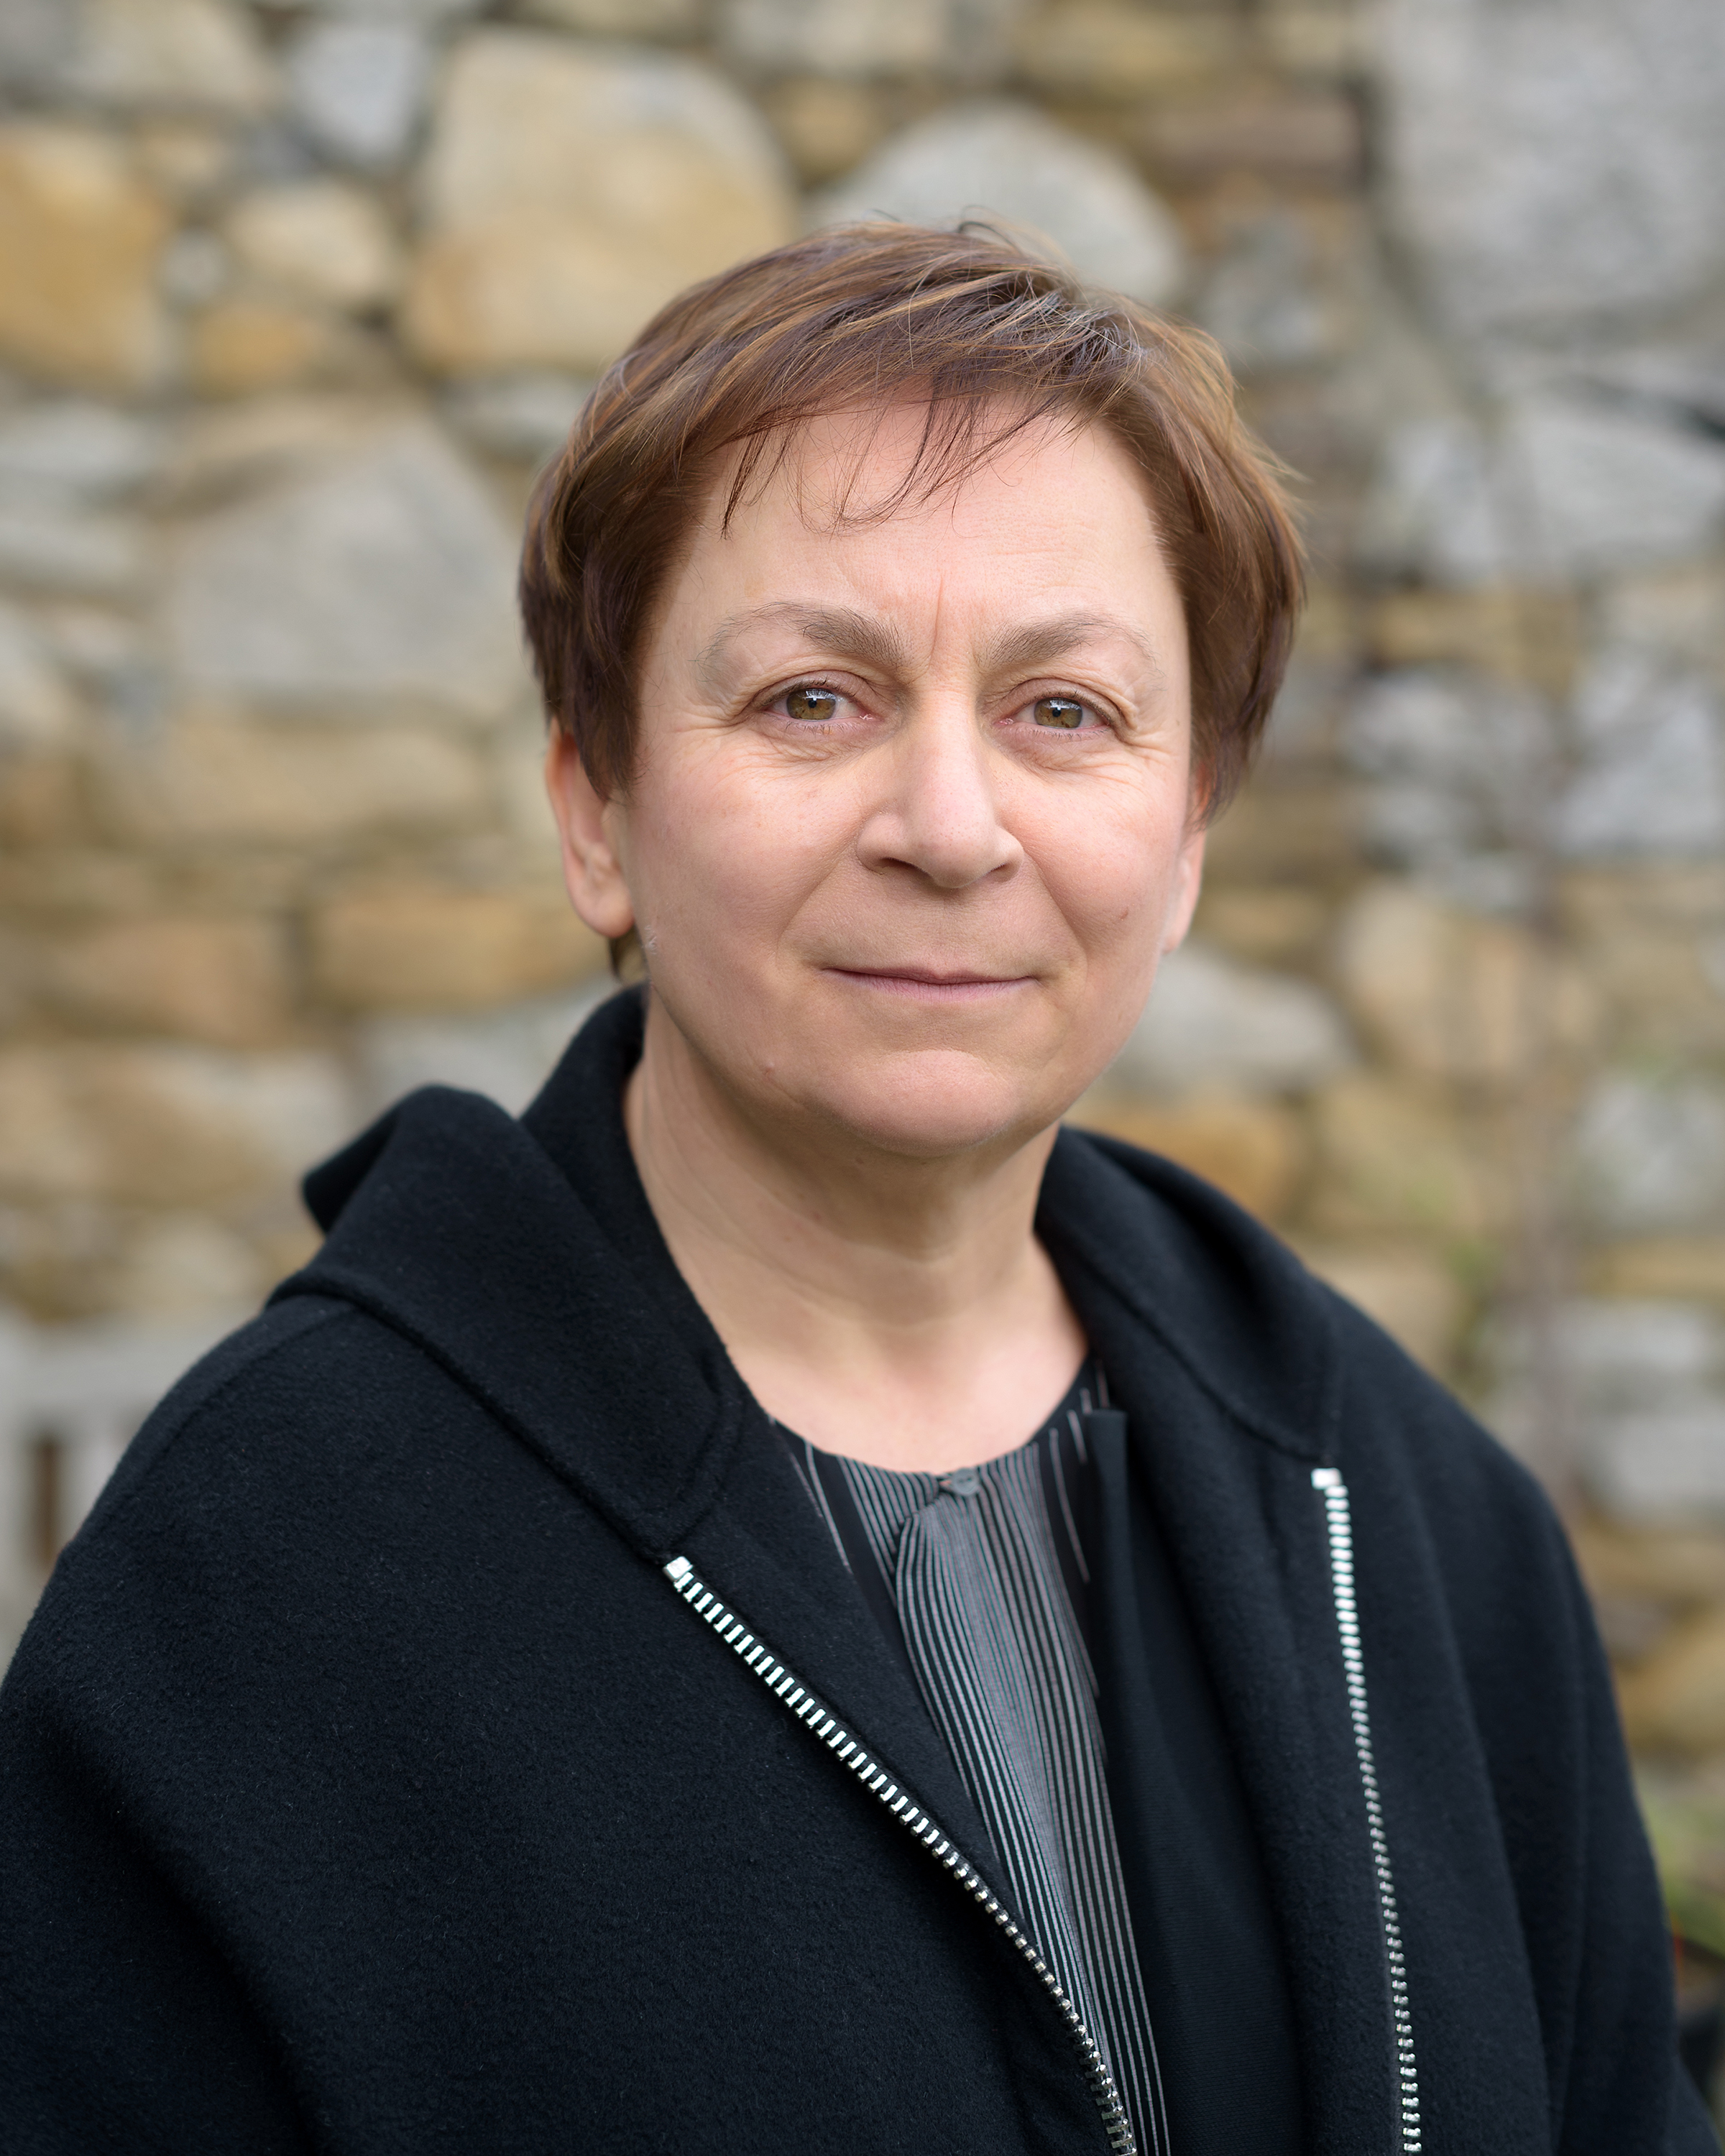 Author Anne Enright is Coming to The Music Hall as Part of the WRITERS IN THE LOFT Series 